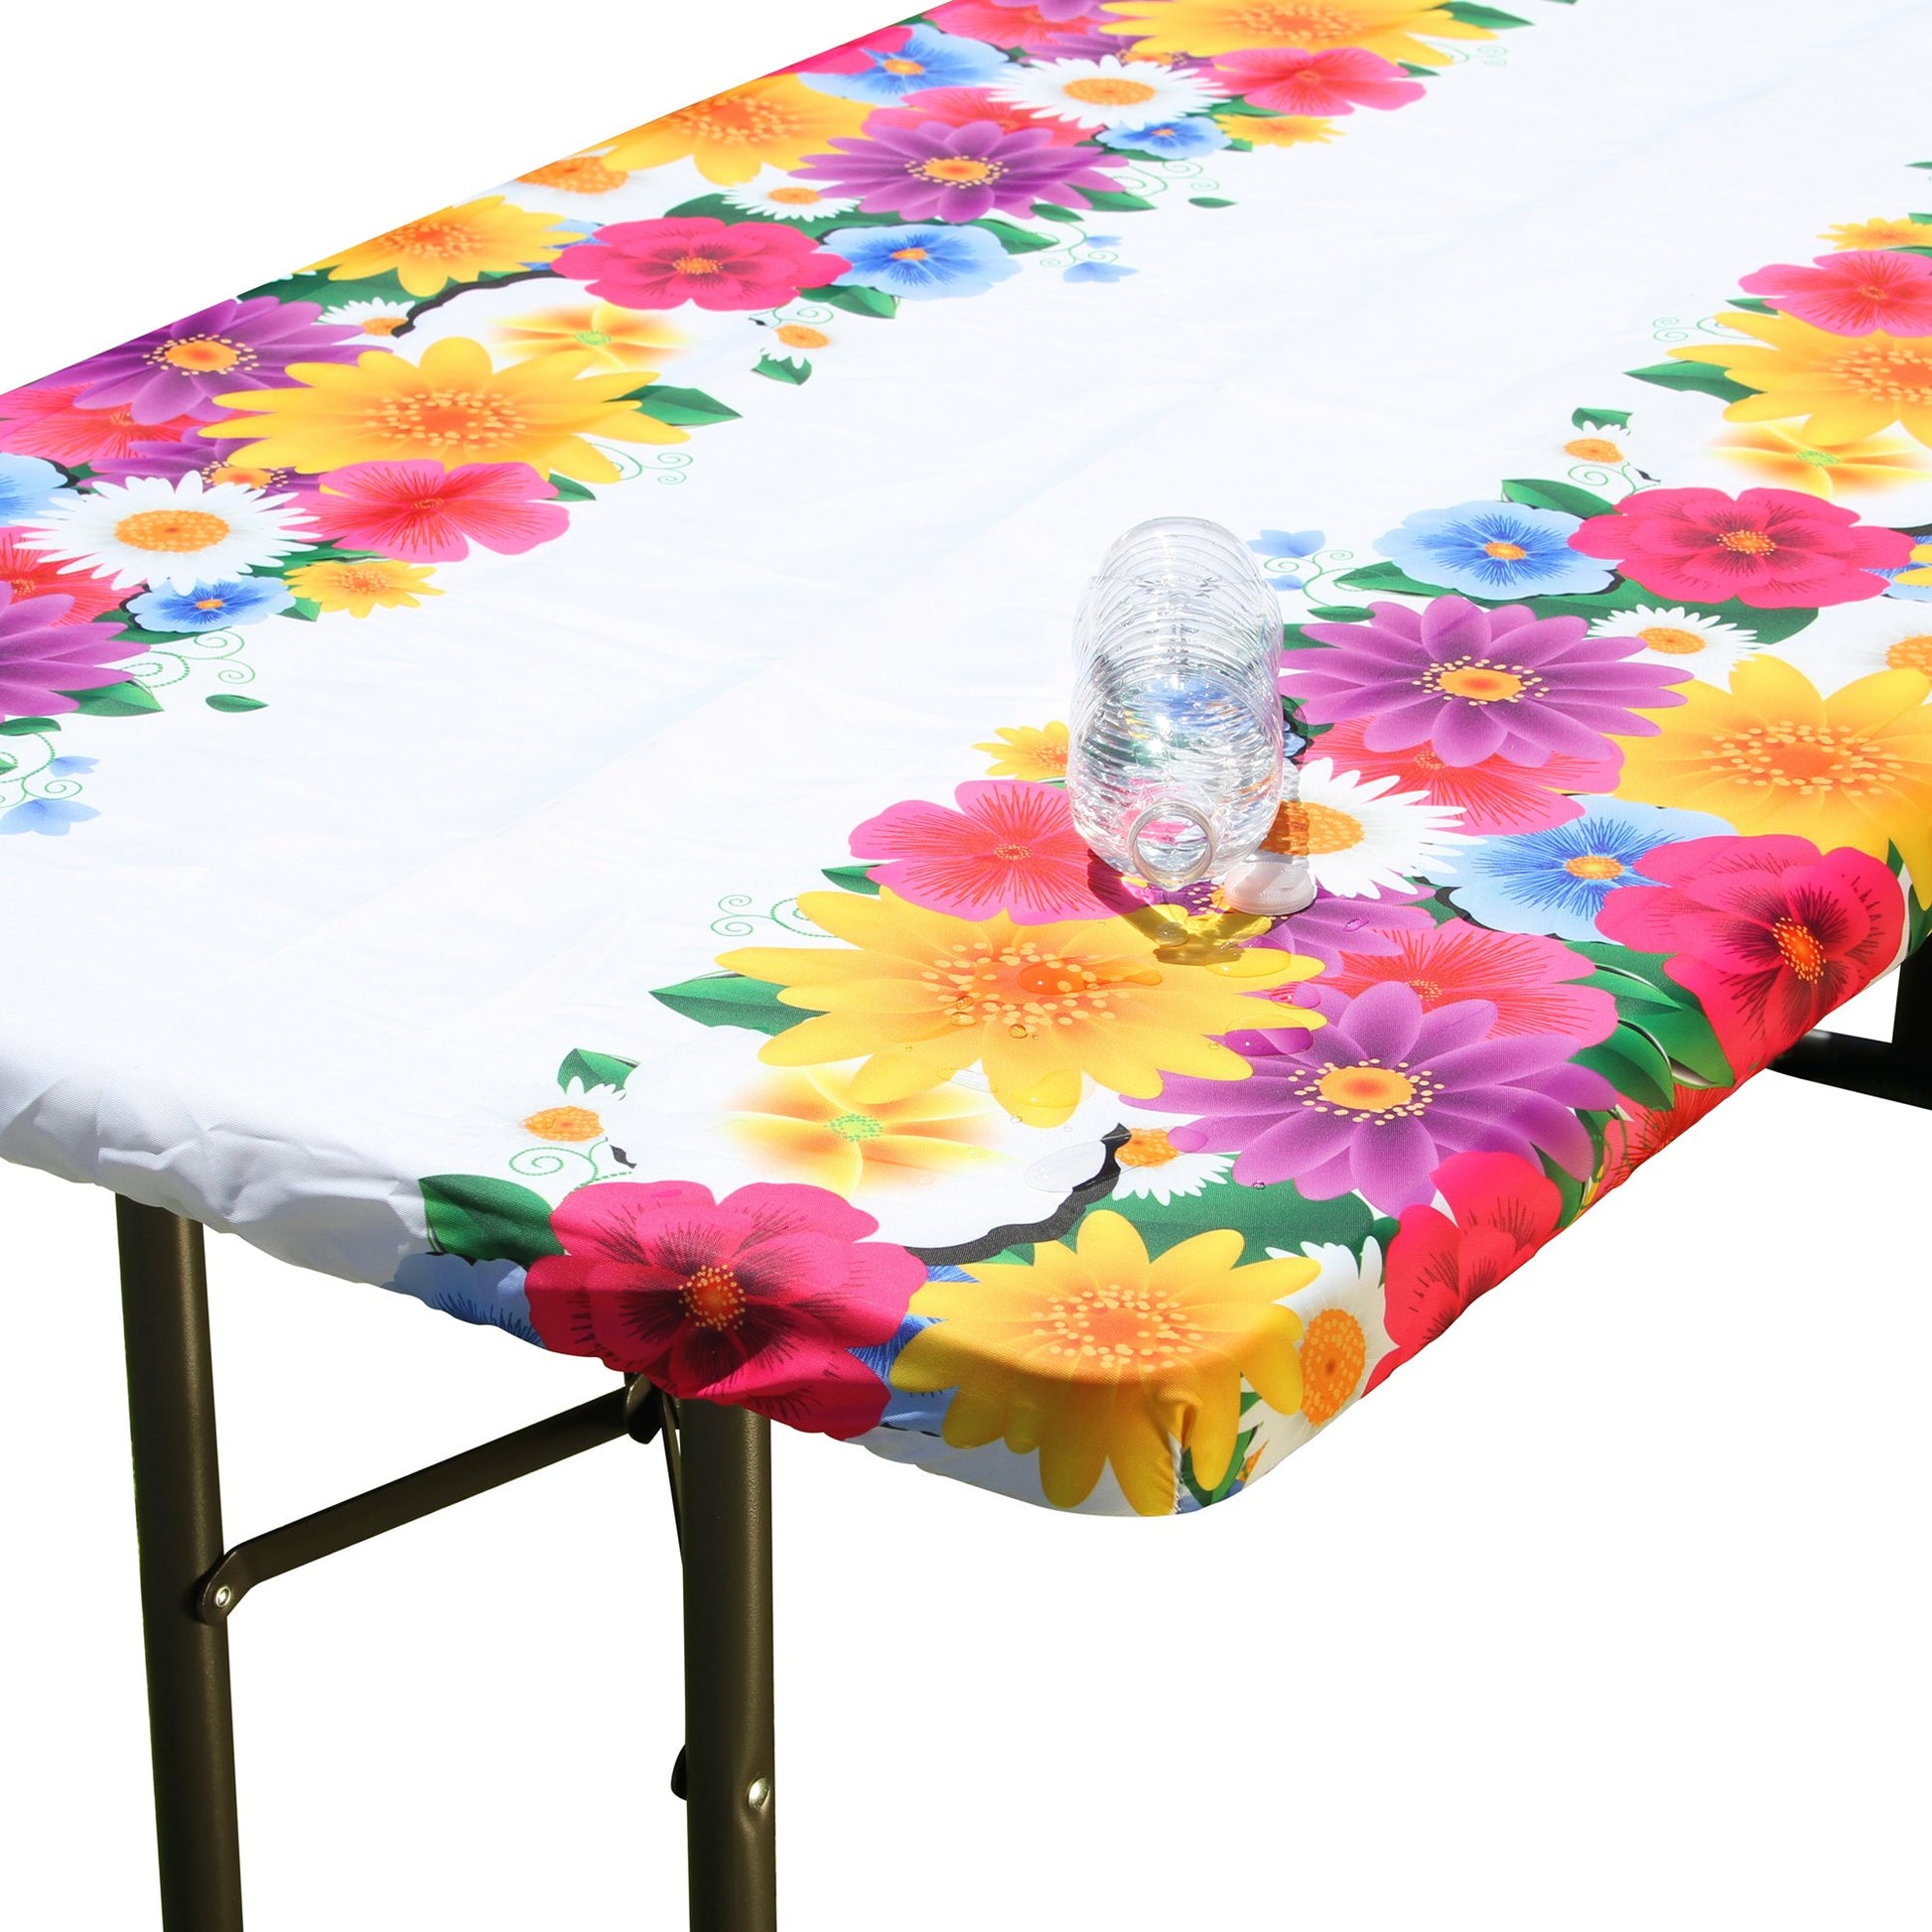 Water beading up on the water resistant surface of TableCloth PLUS 72" Spring Fitted Polyester Tablecloth for 6' Folding Tables